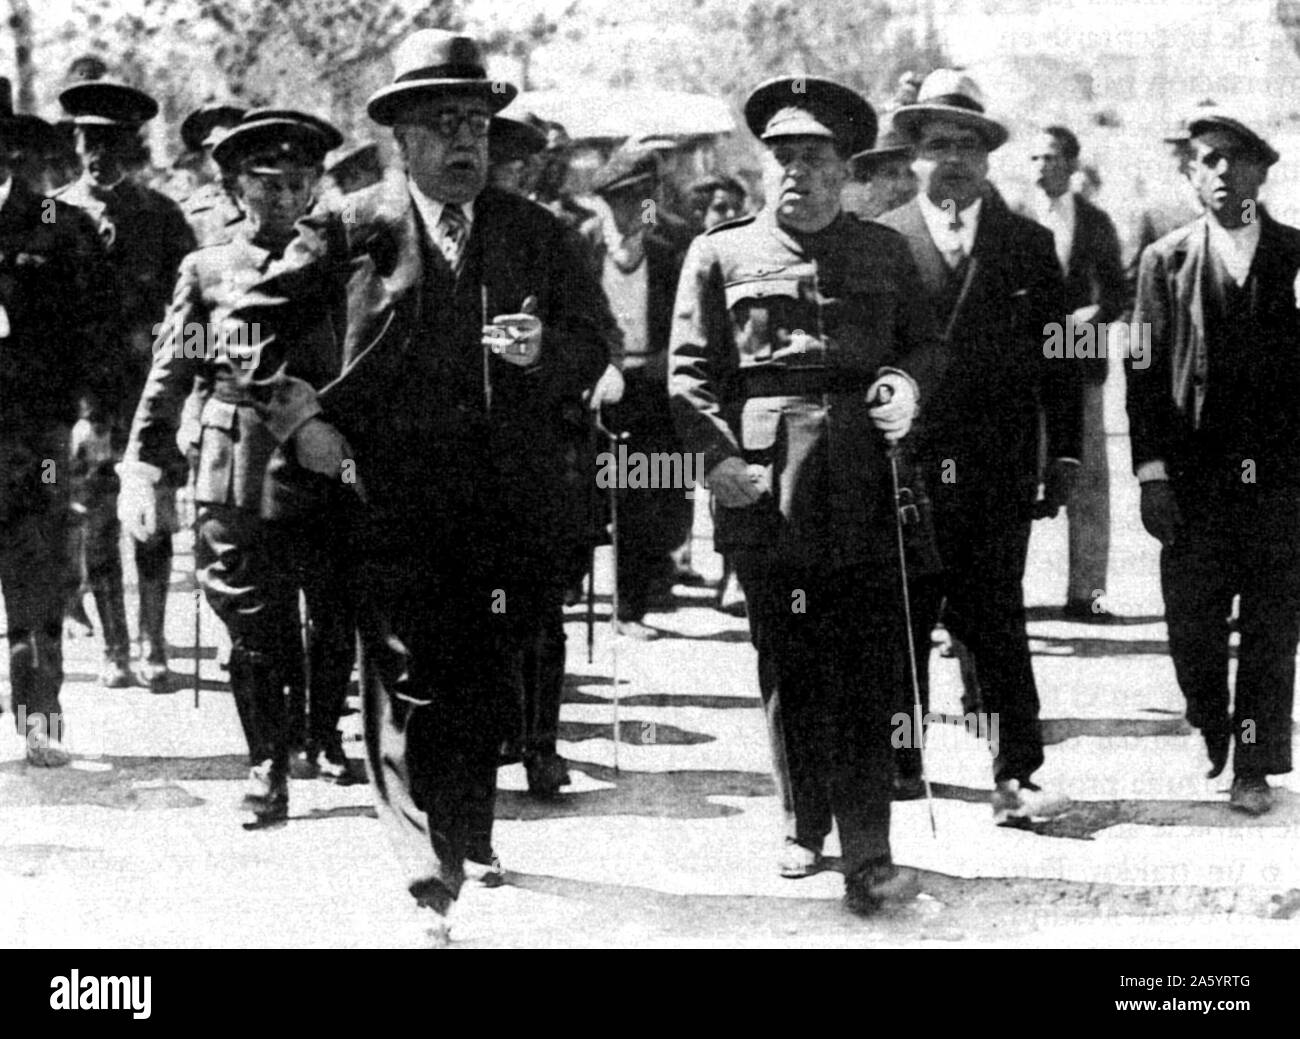 General José Sanjurjo and Azana Prime Minister of Spain 1936. General José Sanjurjo y Sacanell, (1872 – July 20, 1936) General in the Spanish Army. On May 10, 1936, Niceto Alcalá-Zamora was replaced as President of the Republic by Azana, Sanjurjo joined with Generals Emilio Mola, Francisco Franco and Gonzalo Queipo de Llano in a plot to overthrow the republican government. This led to the Nationalist uprising on July 17, 1936, which started the Spanish Civil War. Stock Photo